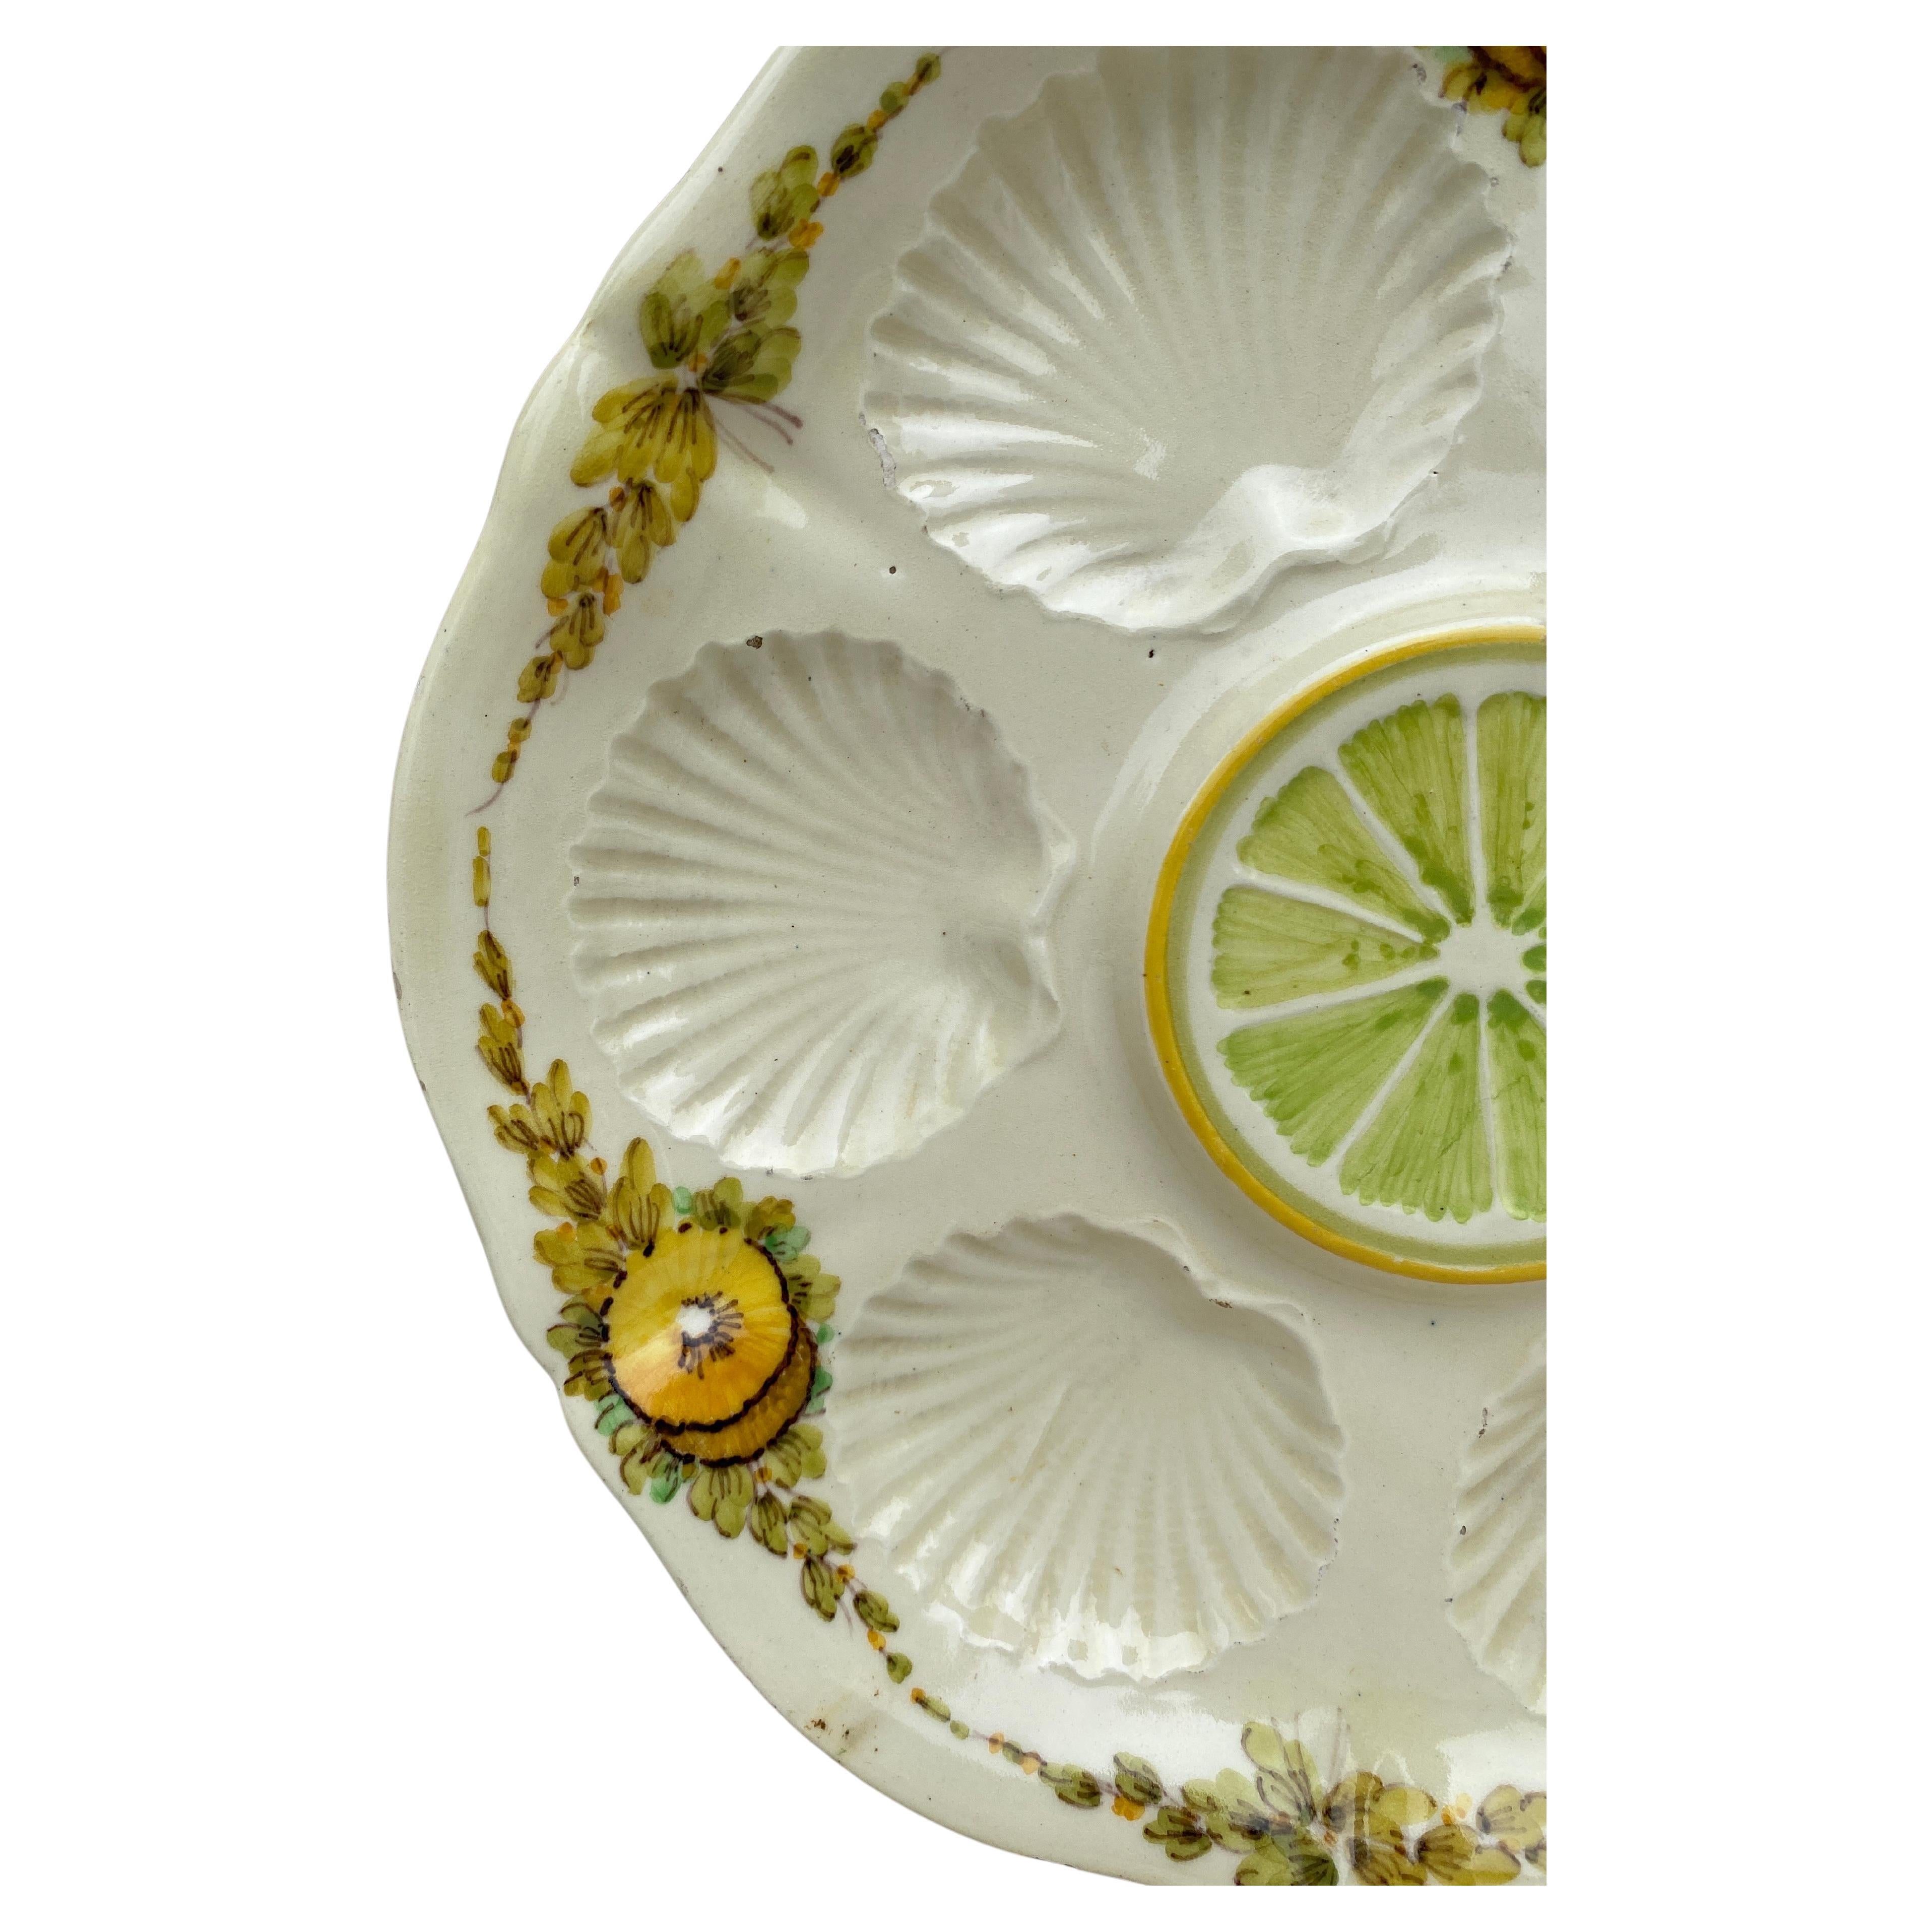 Late 19th Century French Majolica Oyster Plate With Yellow Flowers, circa 1890 For Sale